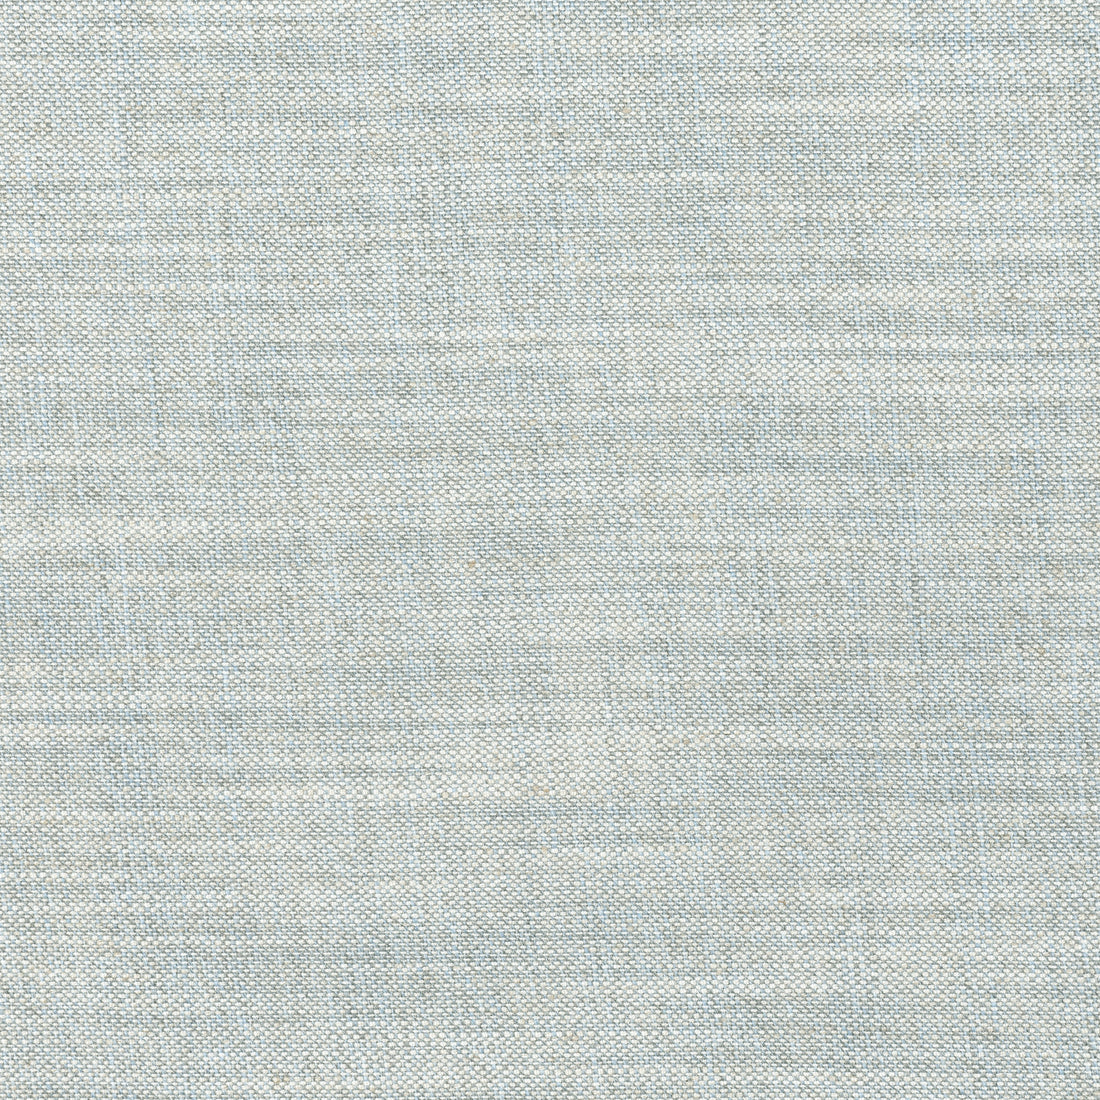 Terra Linen fabric in horizon color - pattern number FWW7685 - by Thibaut in the Palisades collection